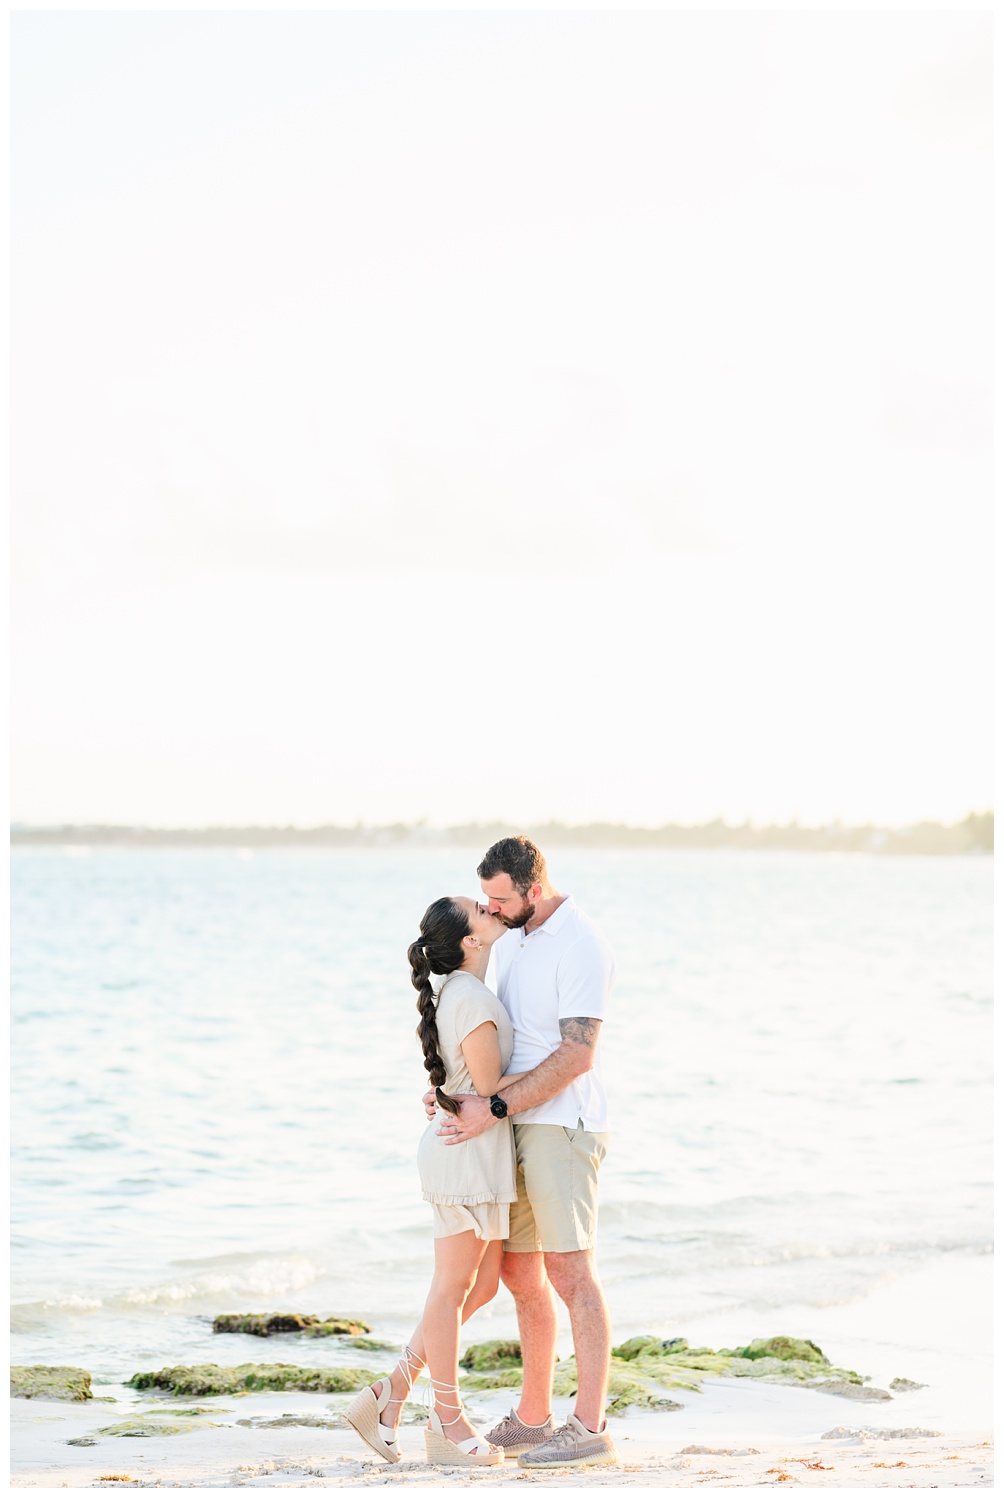 Best Beach Photographer for destination wedding and engagements in Mexico